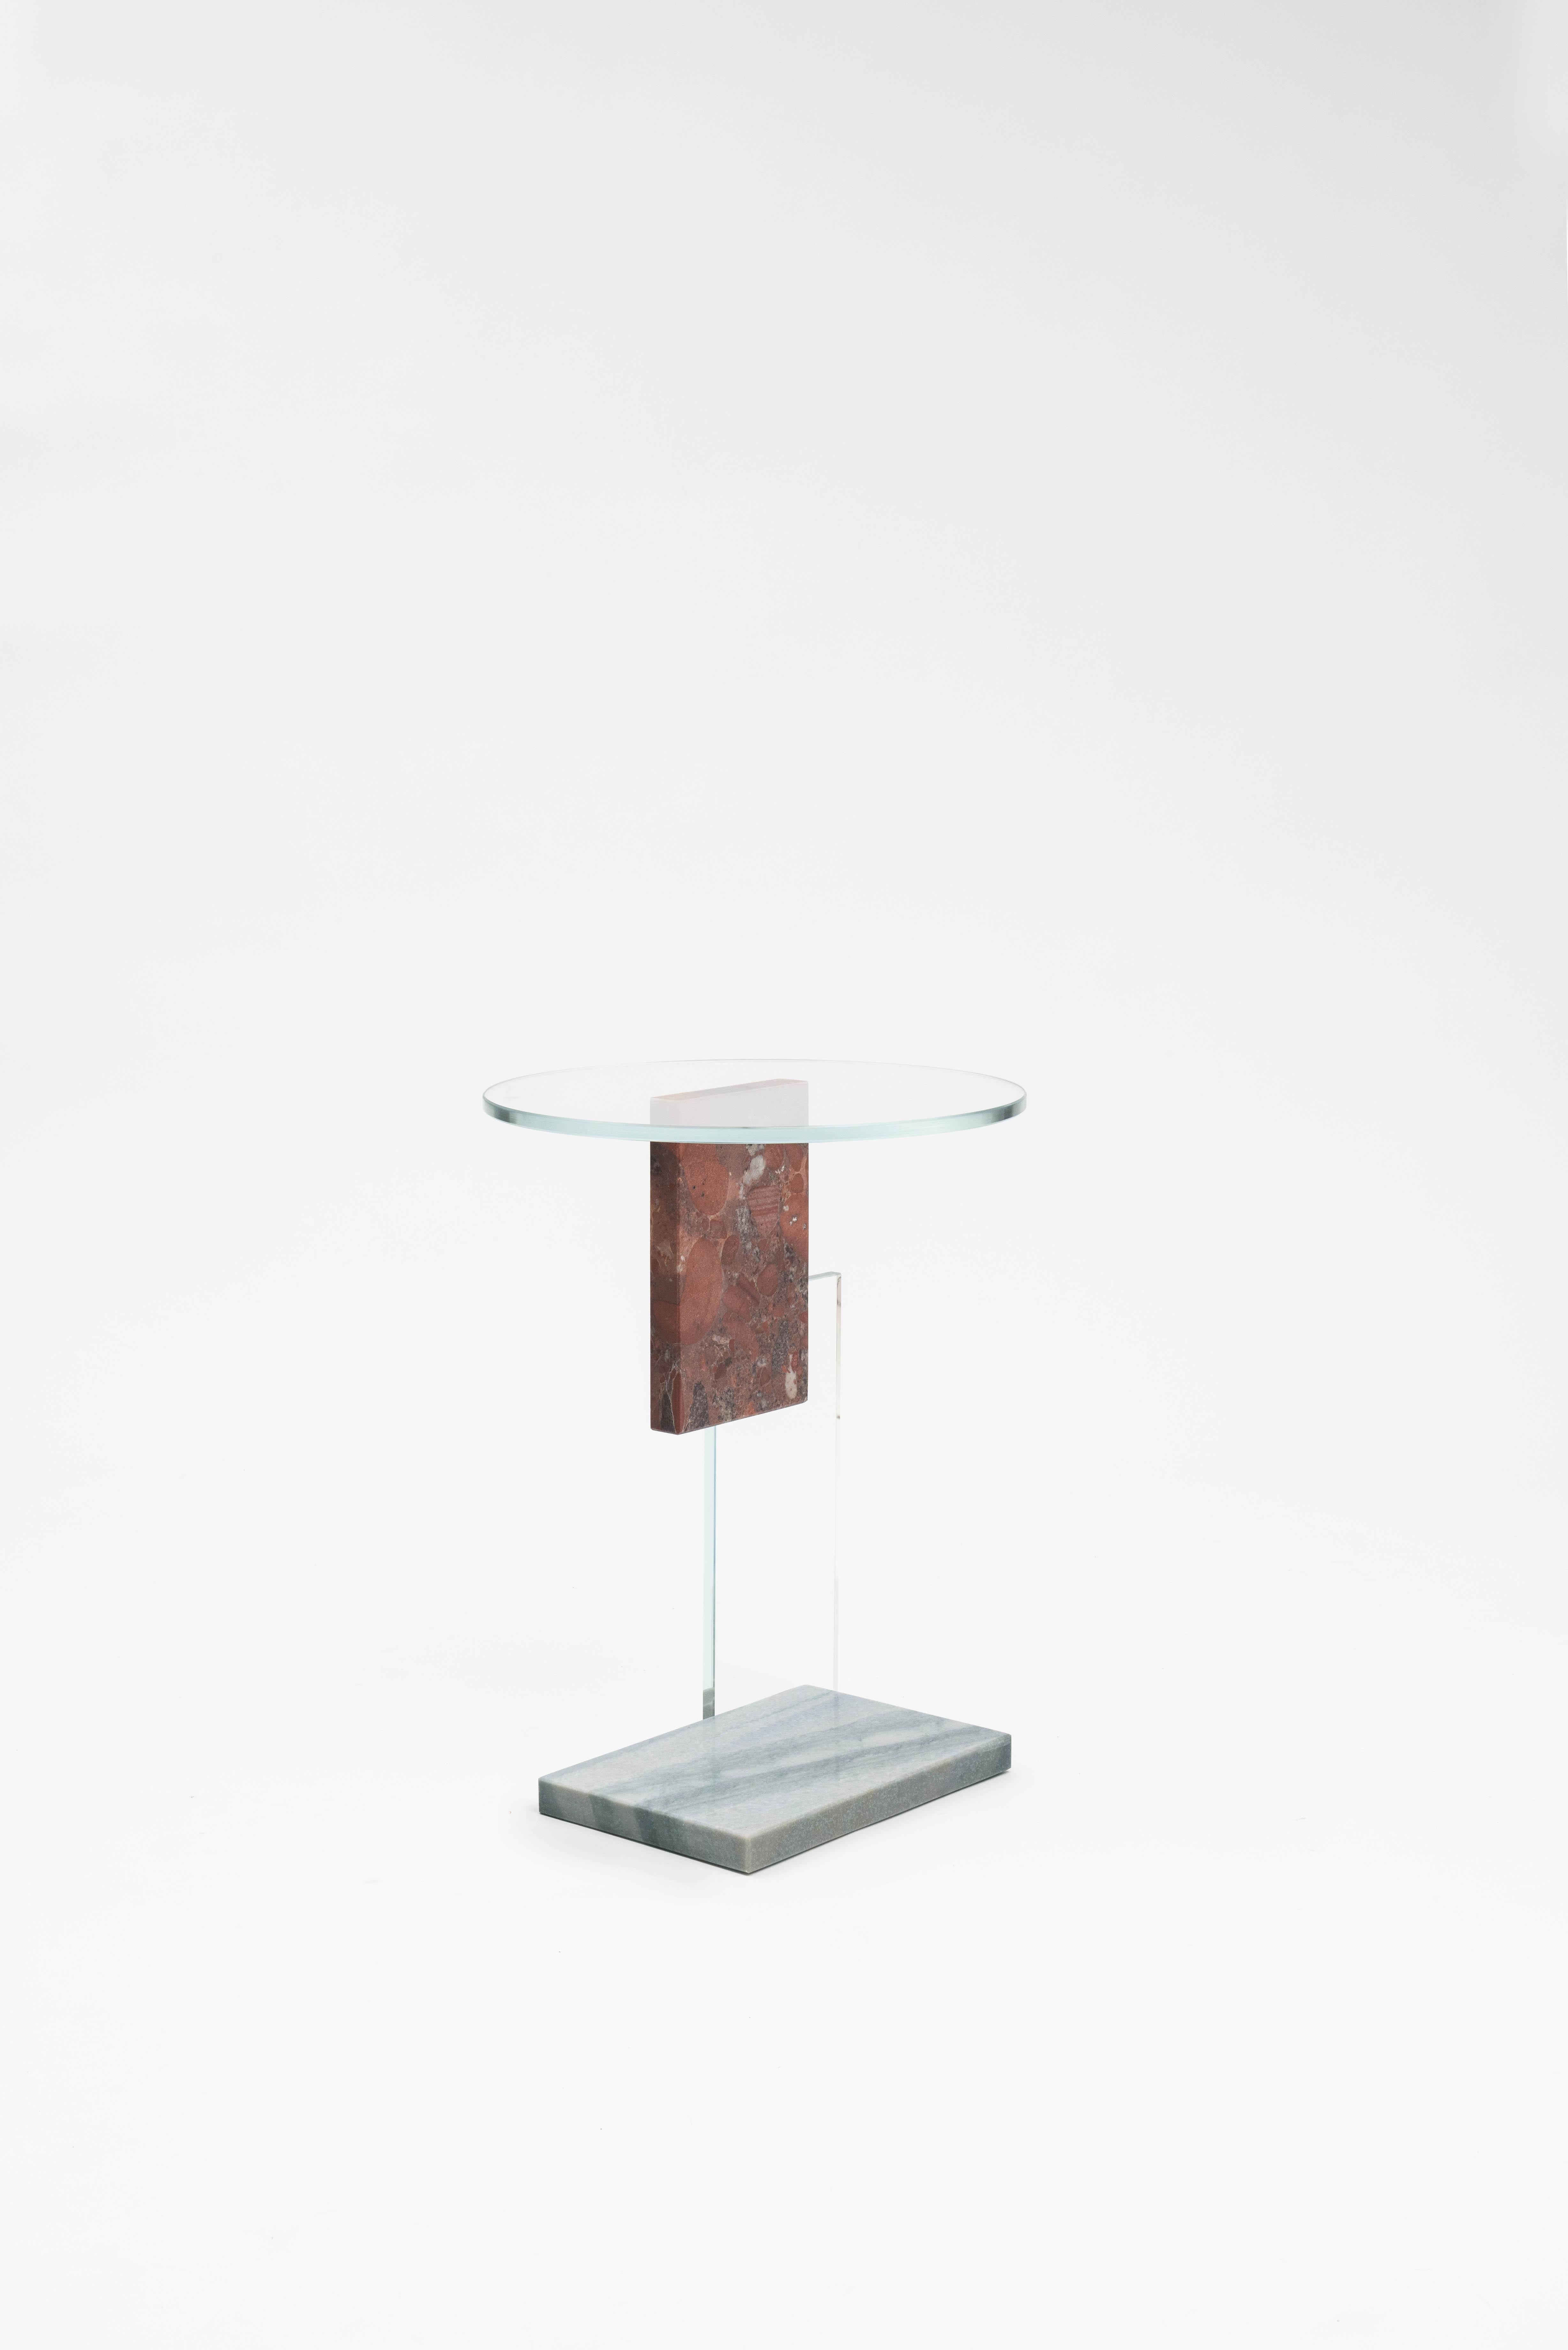 Glass Delta S Side Table by Frederic Saulou